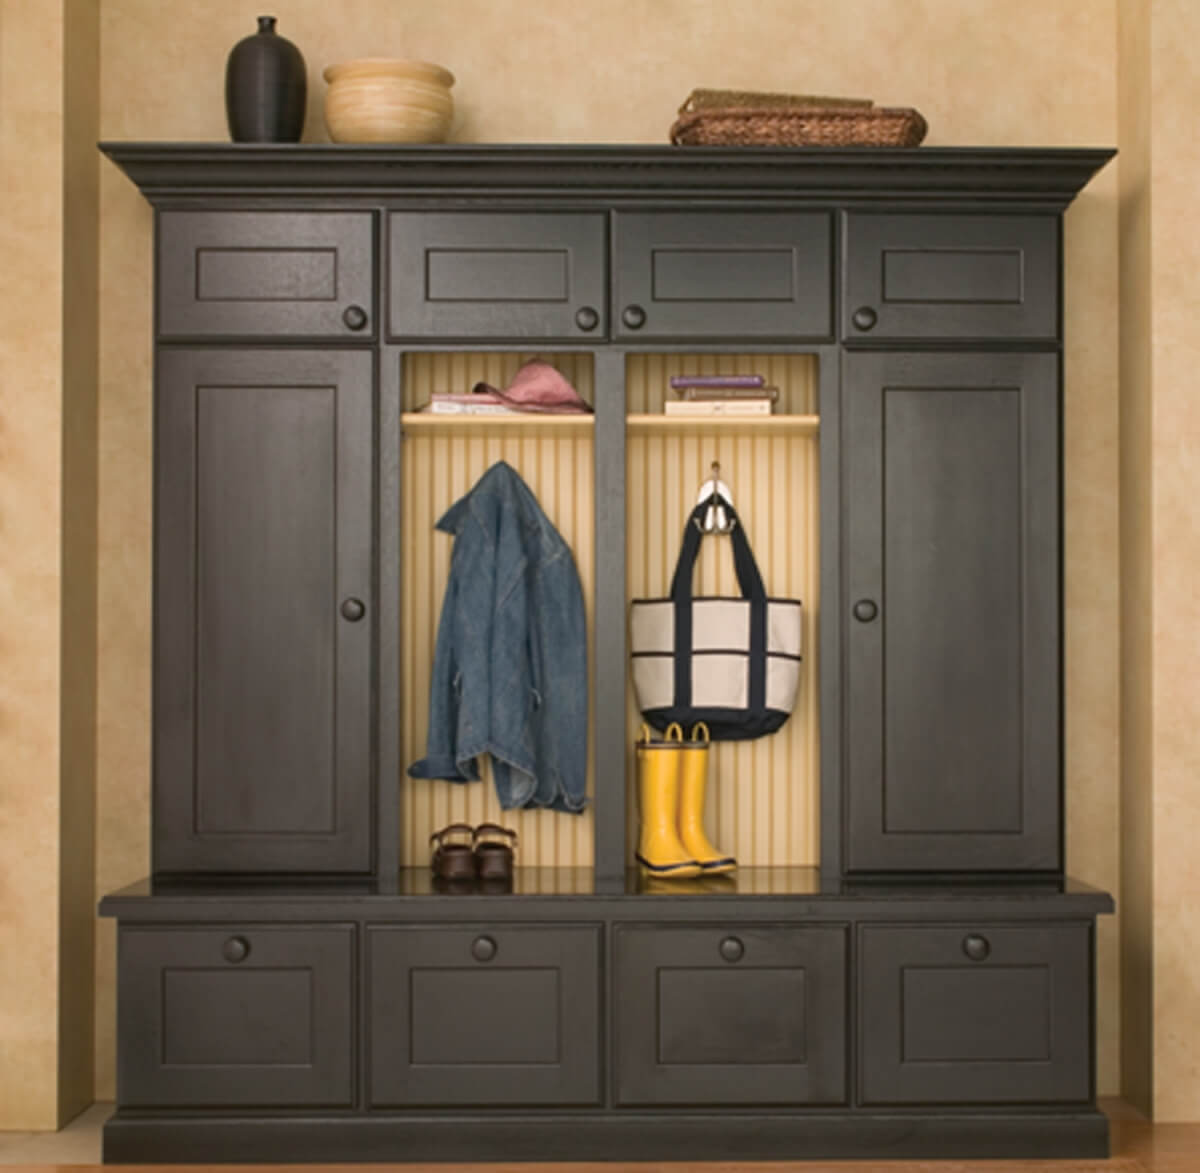 A mudroom locker unit with black painted cabinets from Dura Supreme Cabinetry.